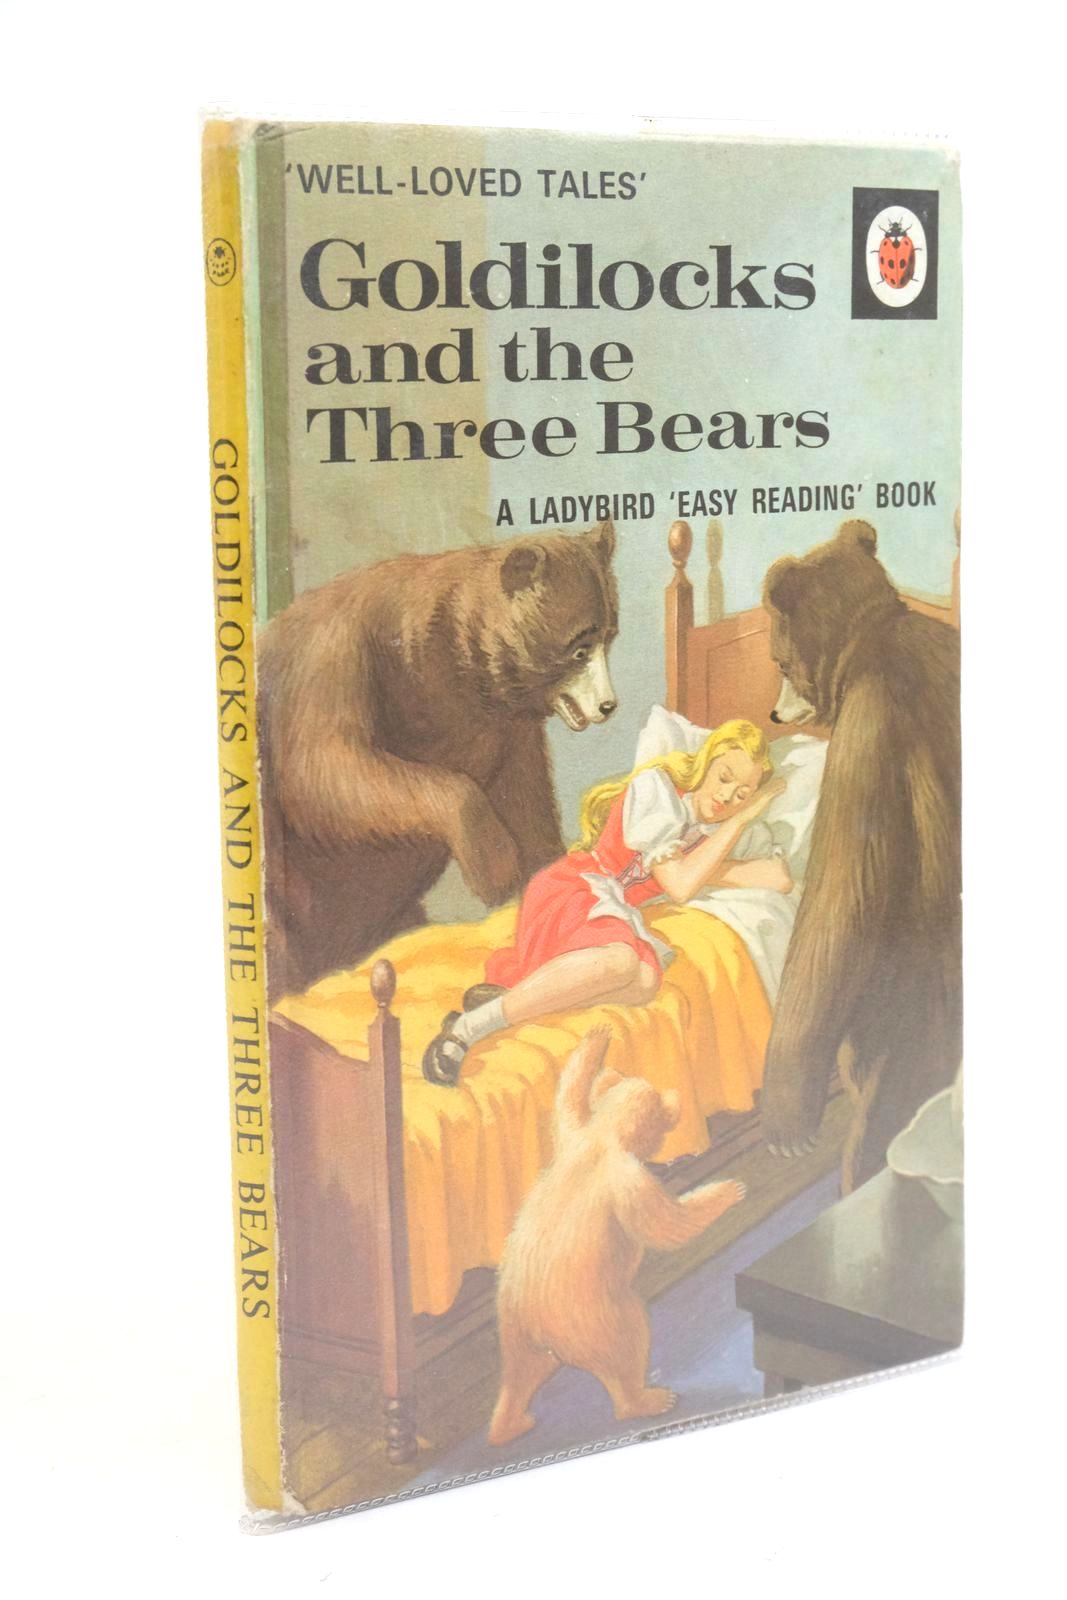 Photo of GOLDILOCKS AND THE THREE BEARS written by Southgate, Vera illustrated by Winter, Eric published by Wills & Hepworth Ltd. (STOCK CODE: 1322374)  for sale by Stella & Rose's Books